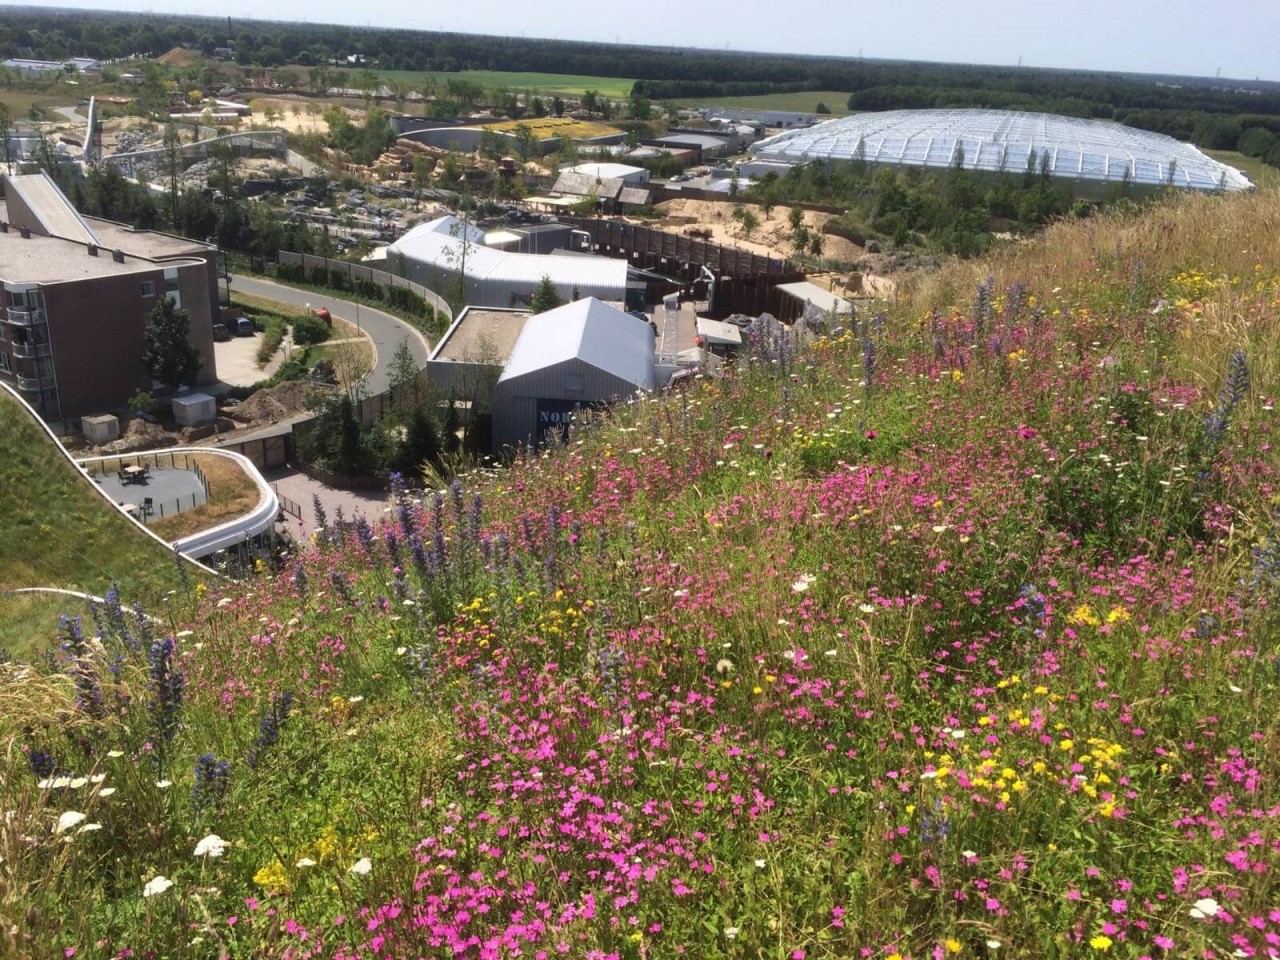 Green roof with Wildflower blankets